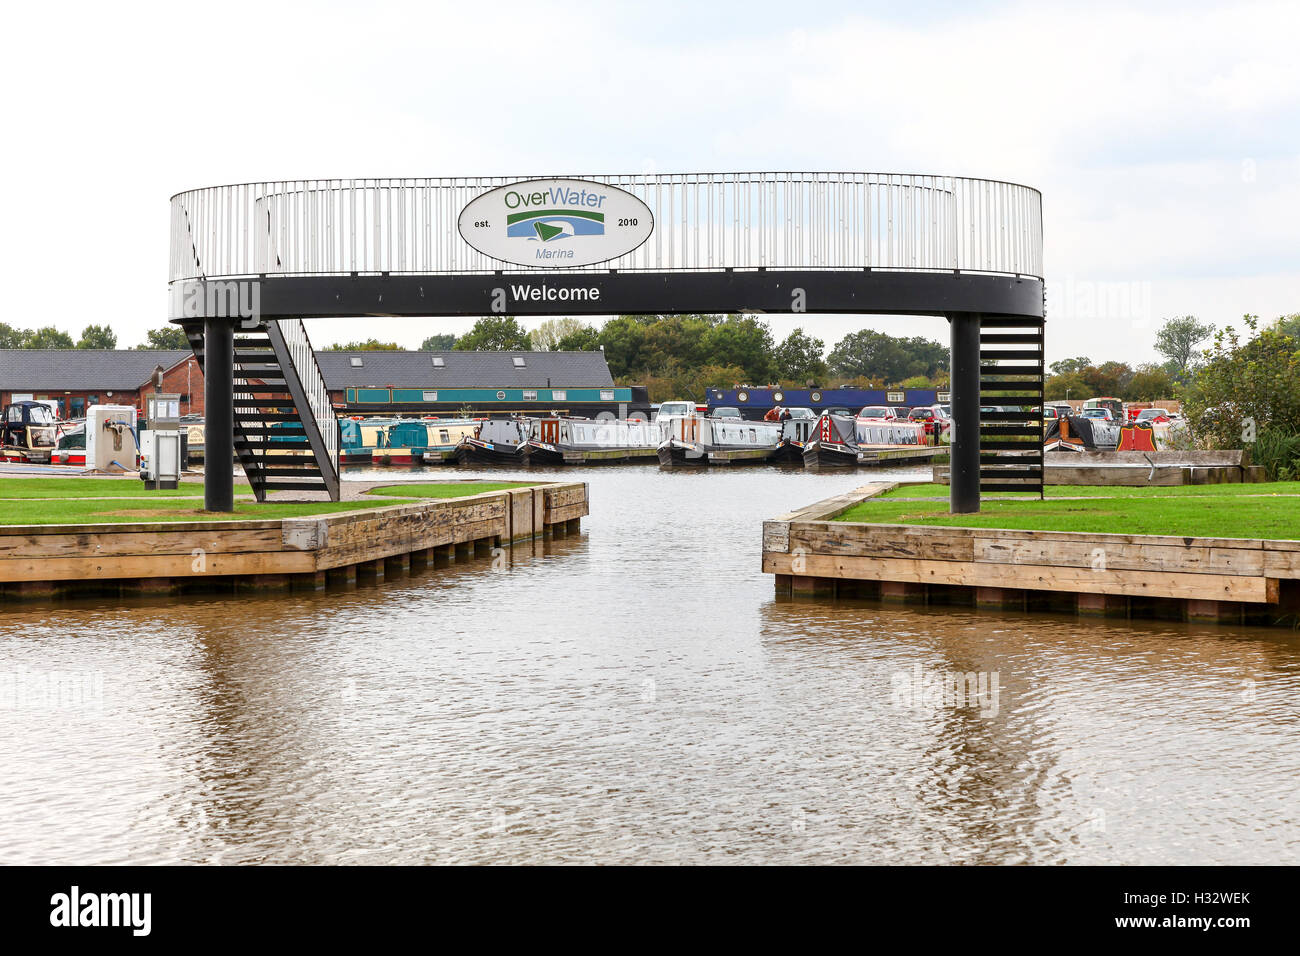 Bridge at the entrance to the Overwater Marina on the Shropshire Union Canal at Audlem Cheshire England UK Stock Photo